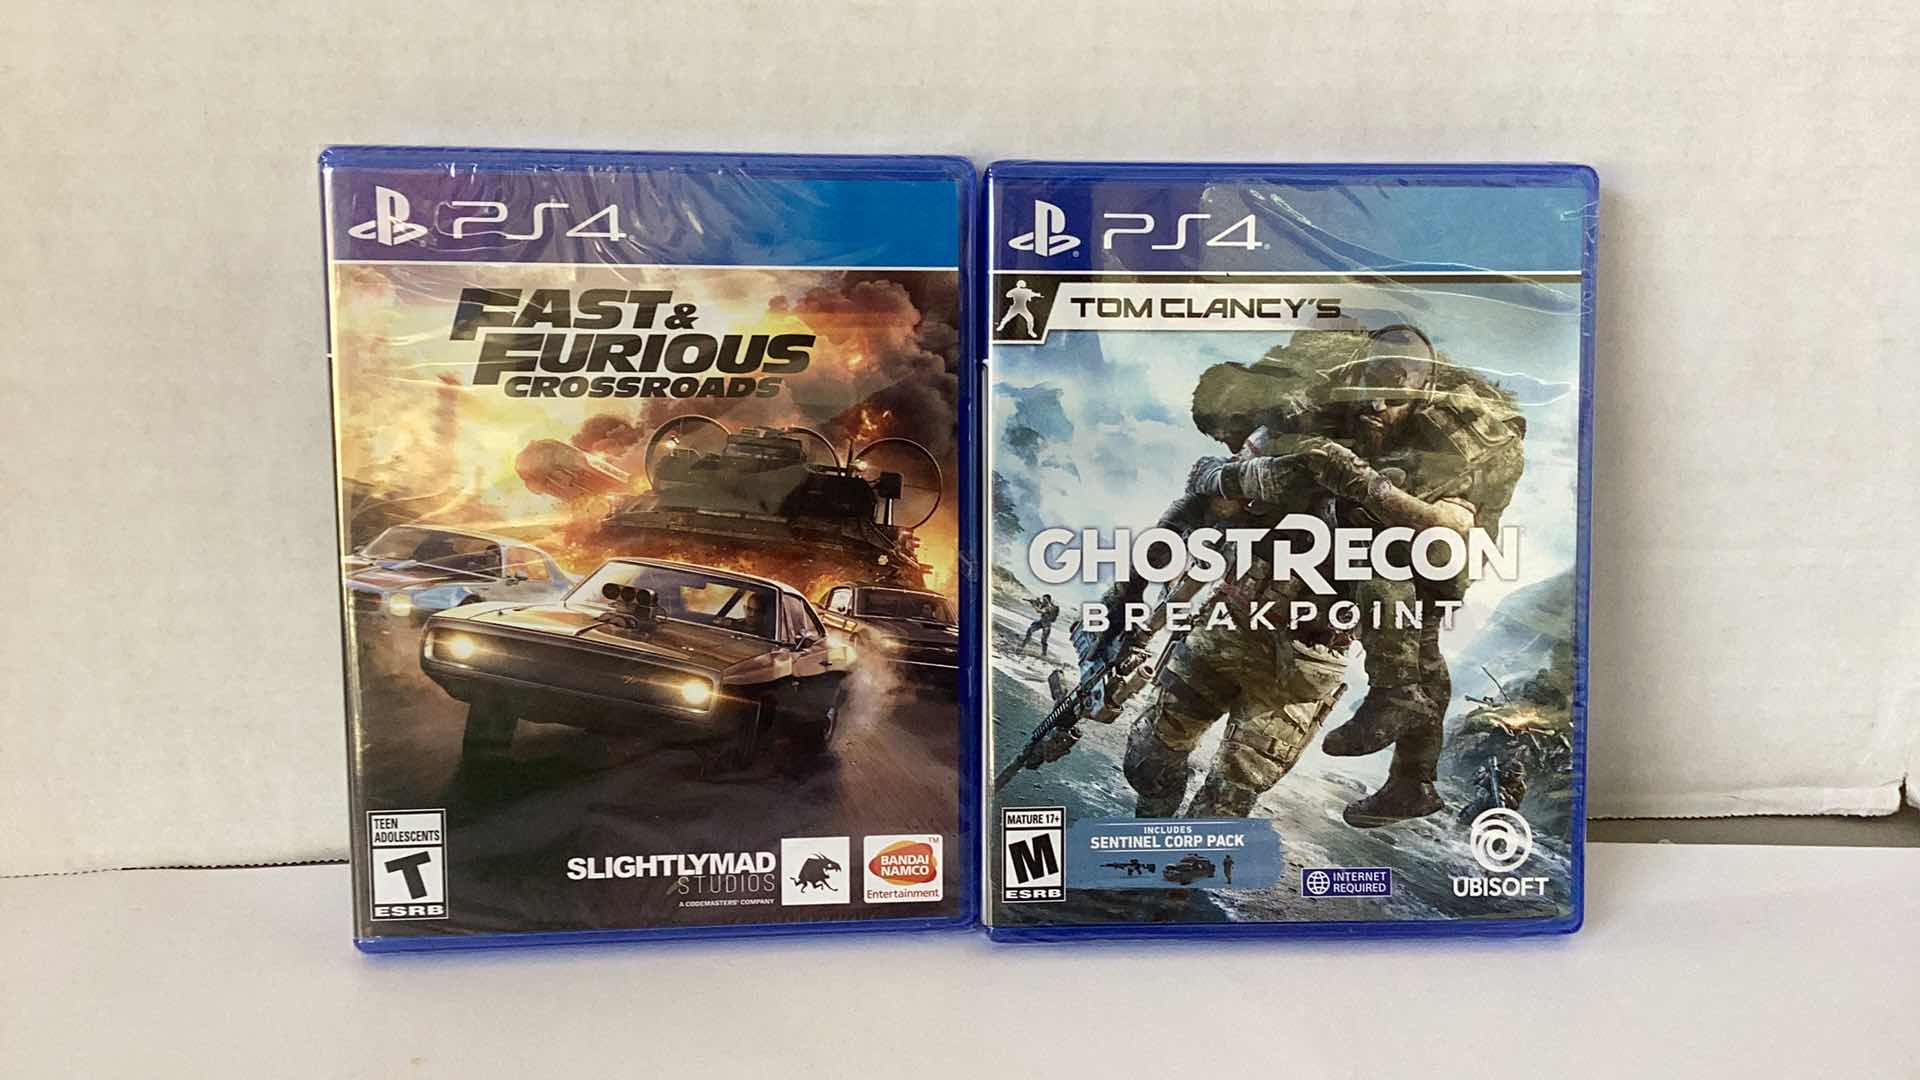 Photo 1 of 2 NEW PS4 GAMES: FAST AND FURIOUS CROSSROADS AND TOM CLANCY'S GHOST RECON BREAKPOINT